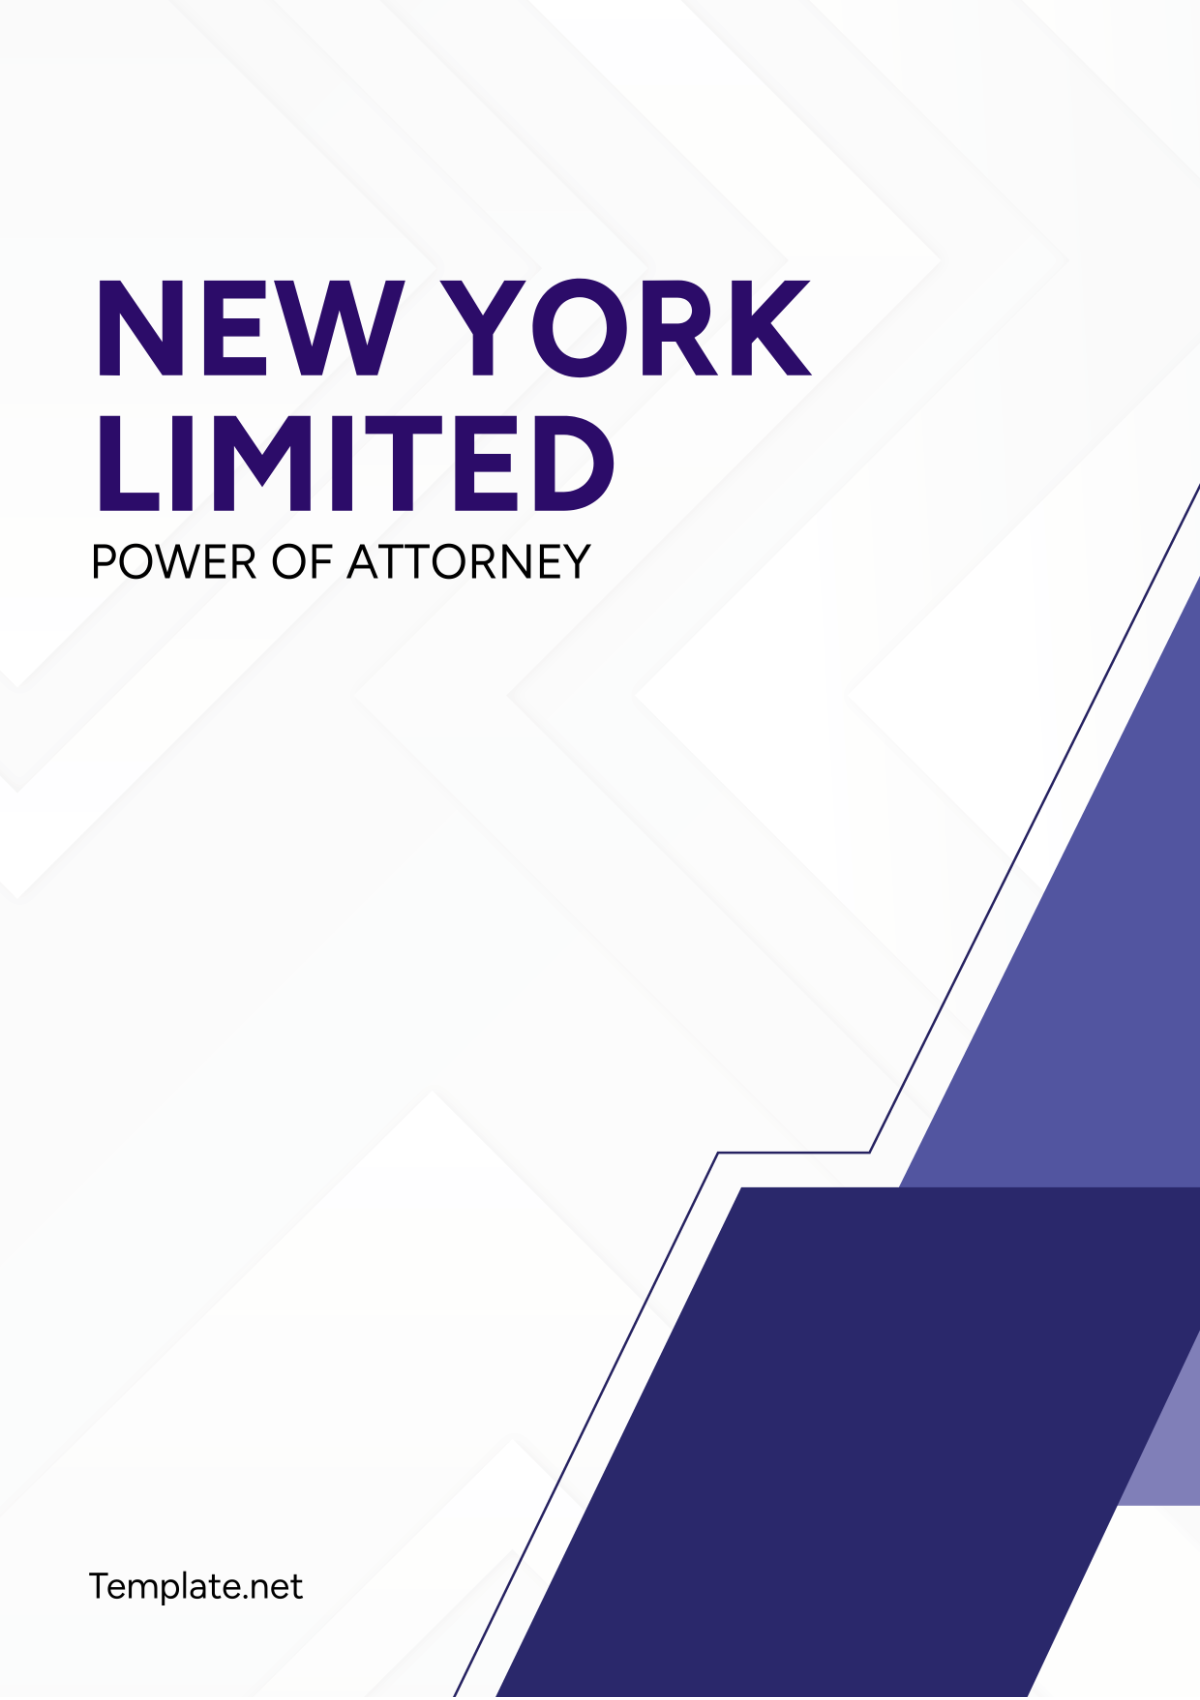 New York Limited Power of Attorney Template